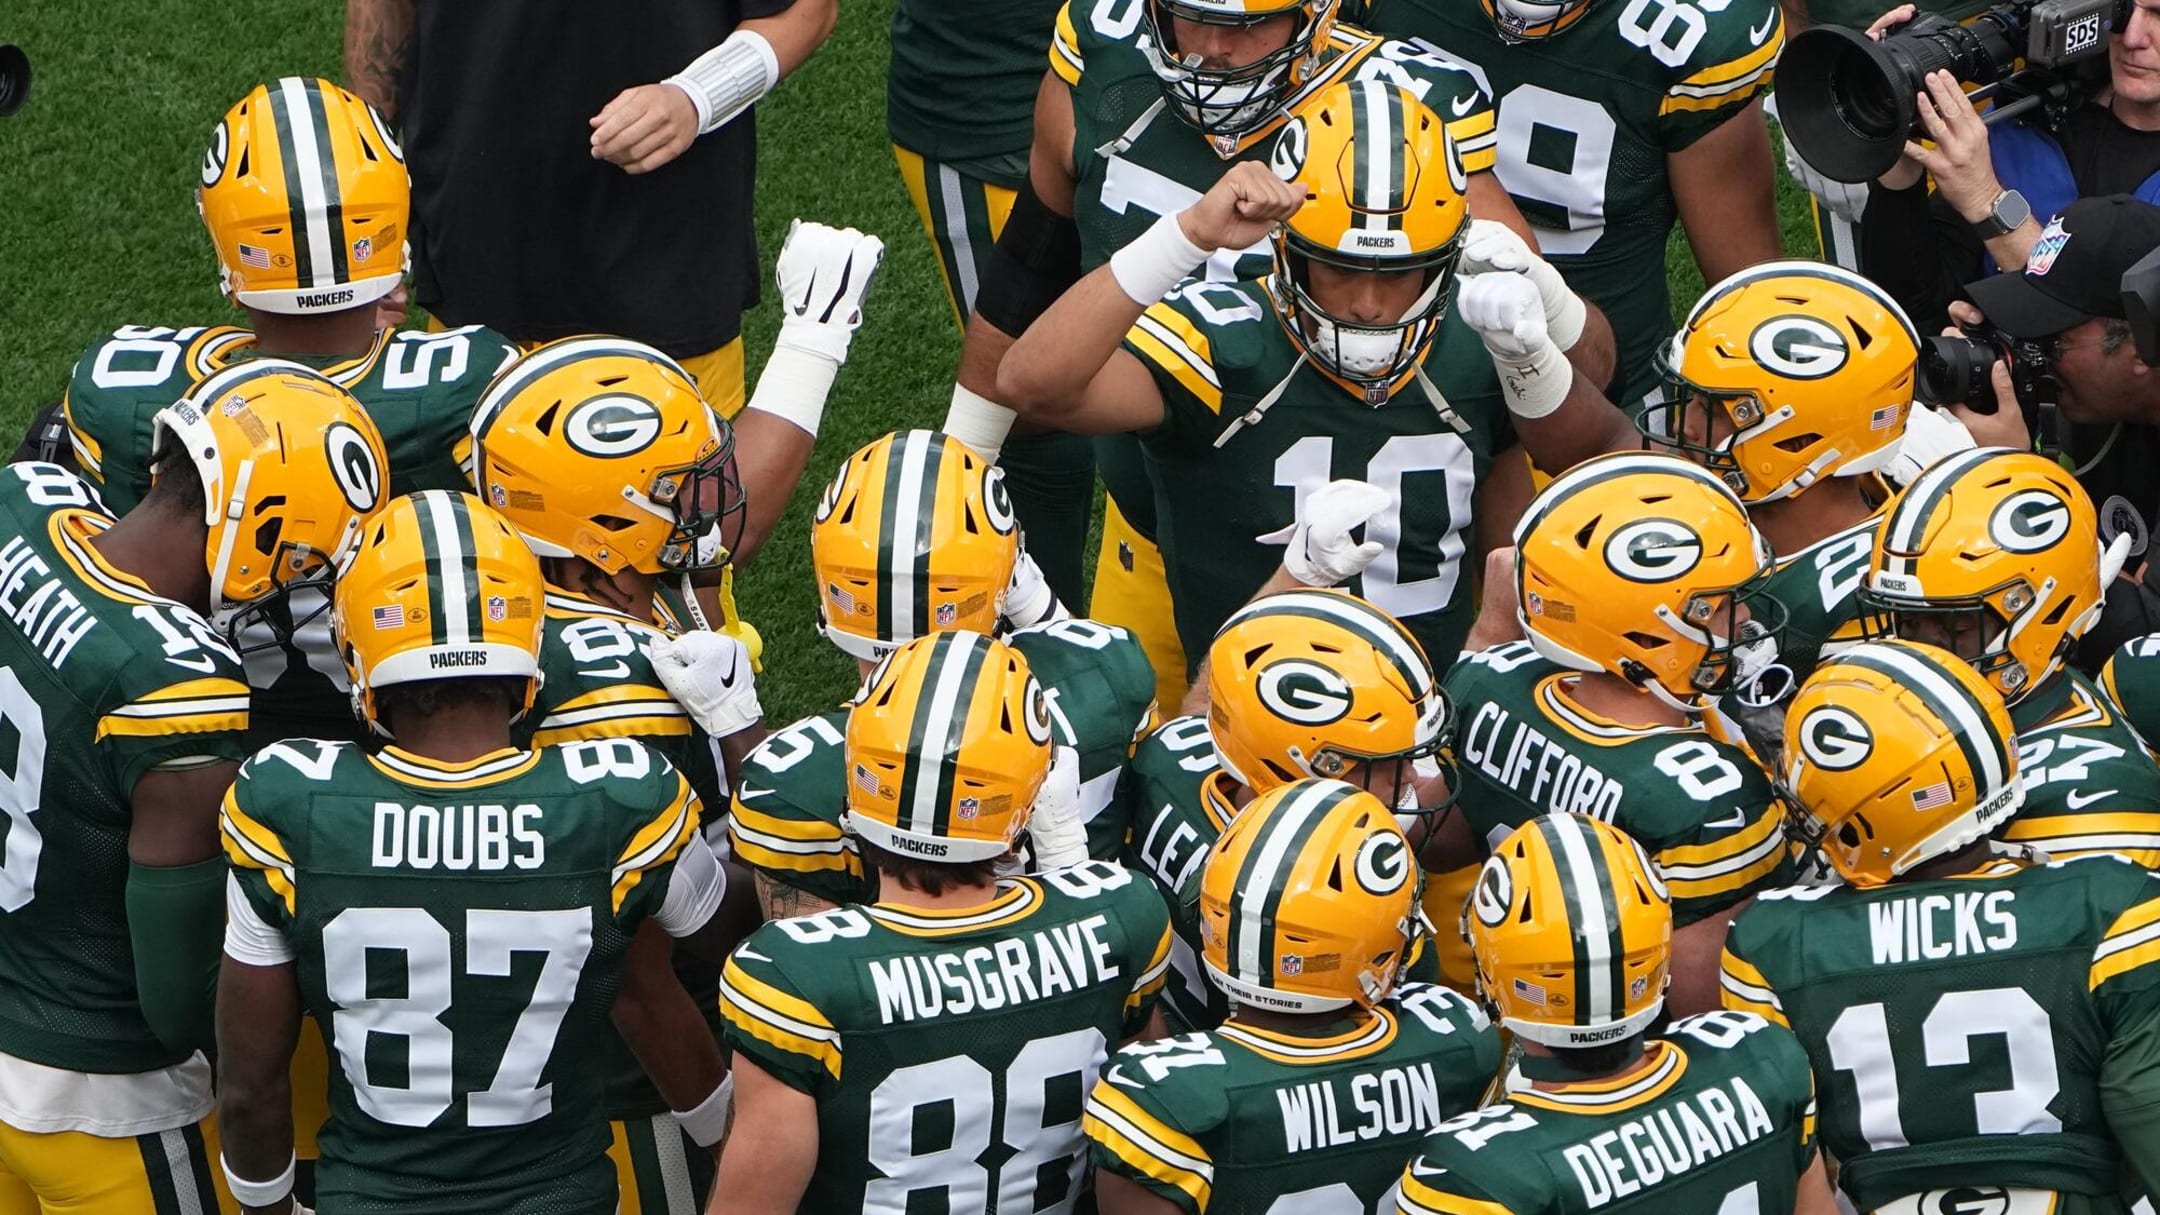 NFL 'TNF' Week 4: Best bets and preview for Packers vs. Lions